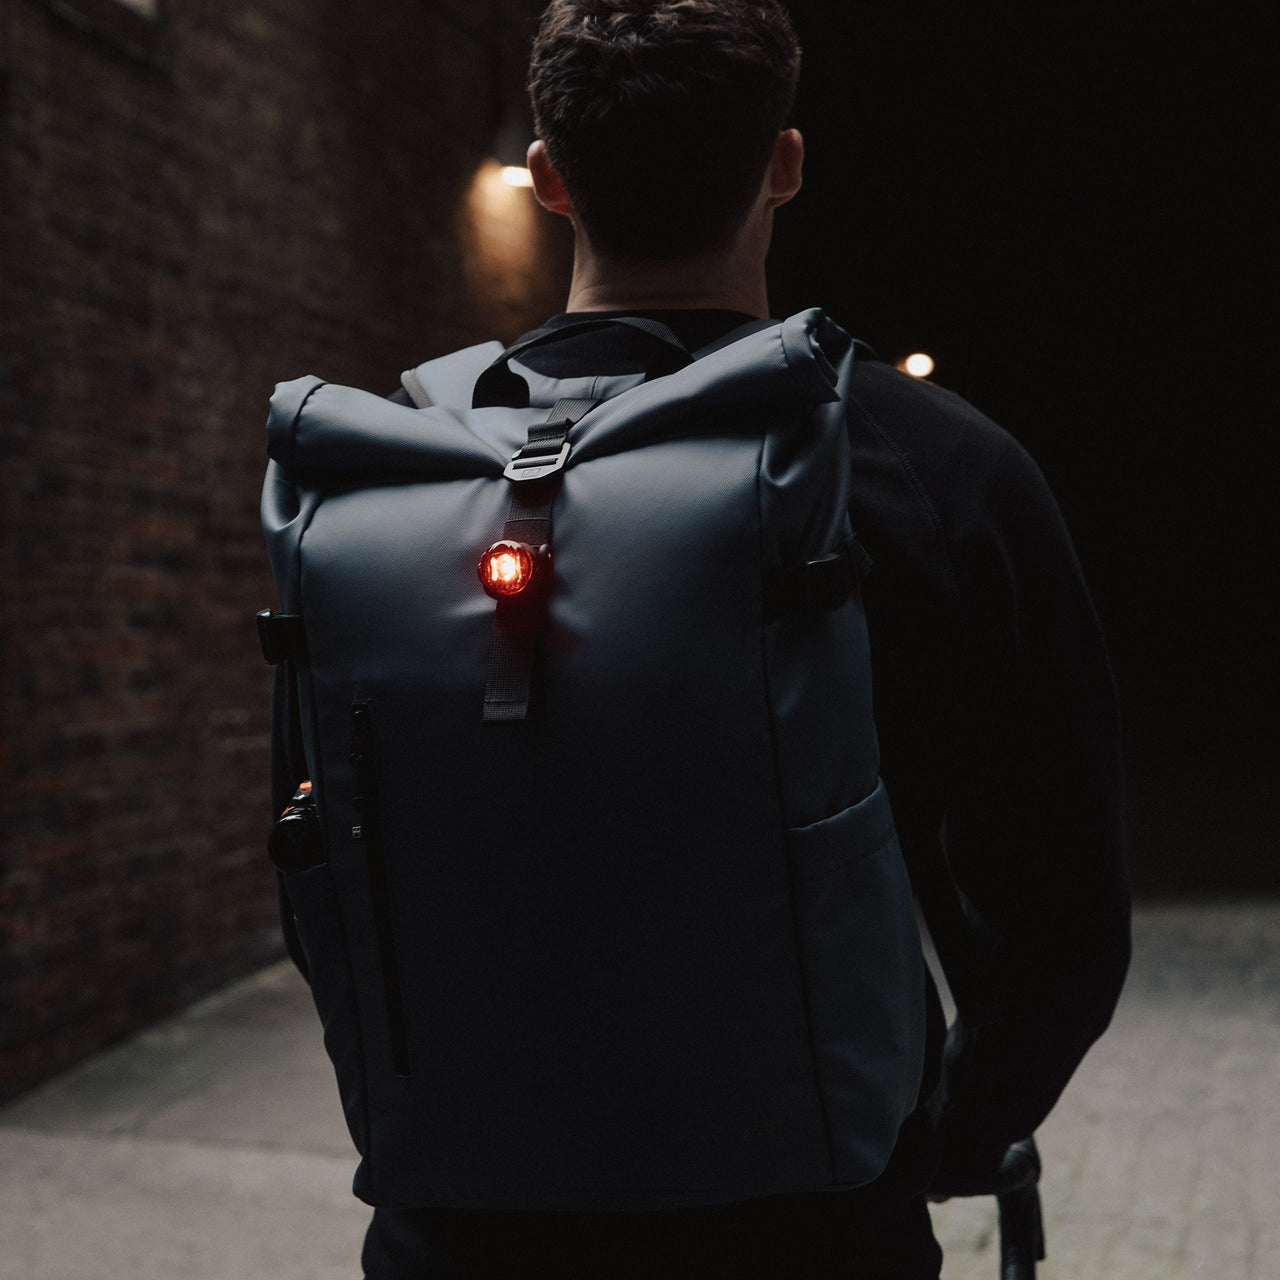 Back view of a man wearing The Roll Top in Tasmin Blue with a bike light on the bag.